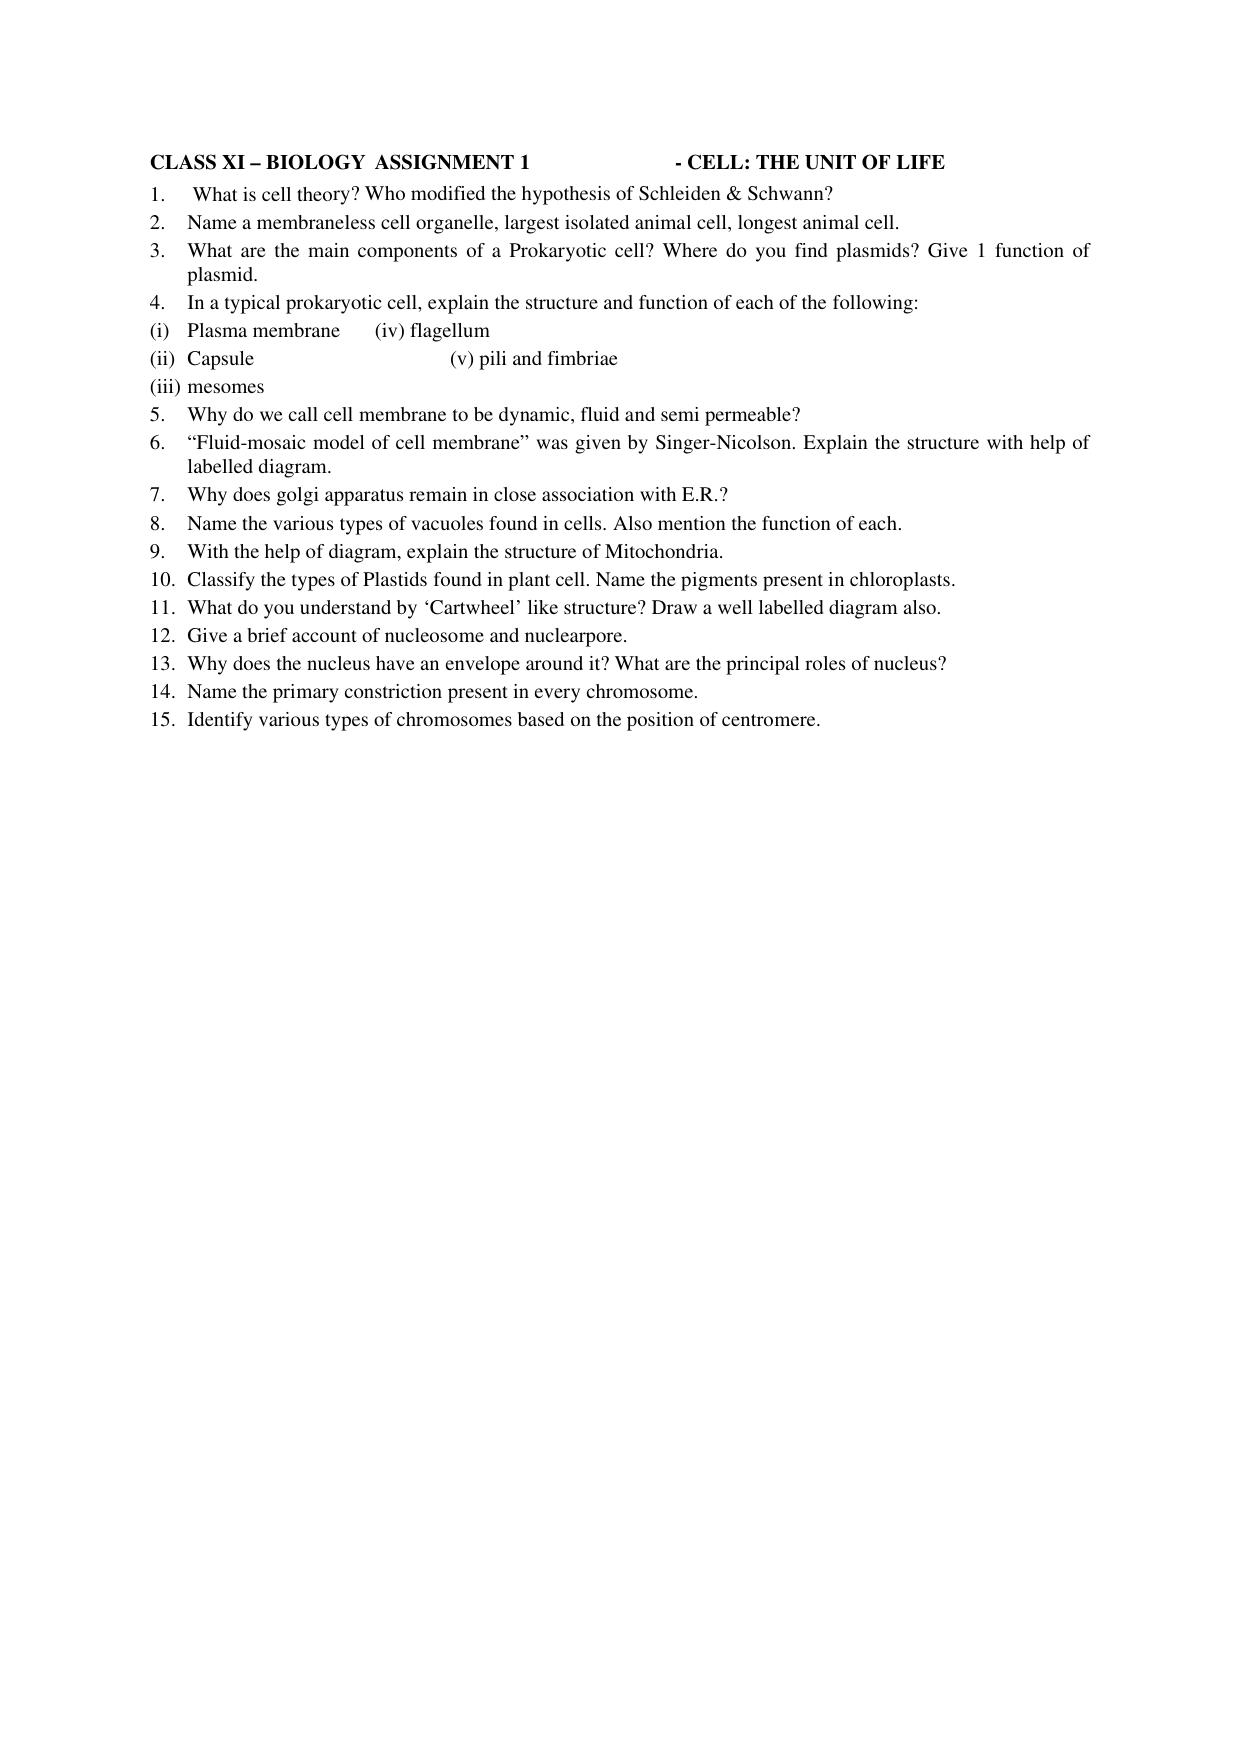 CBSE Worksheets for Class 11 Biology Assignment 1 - Page 1